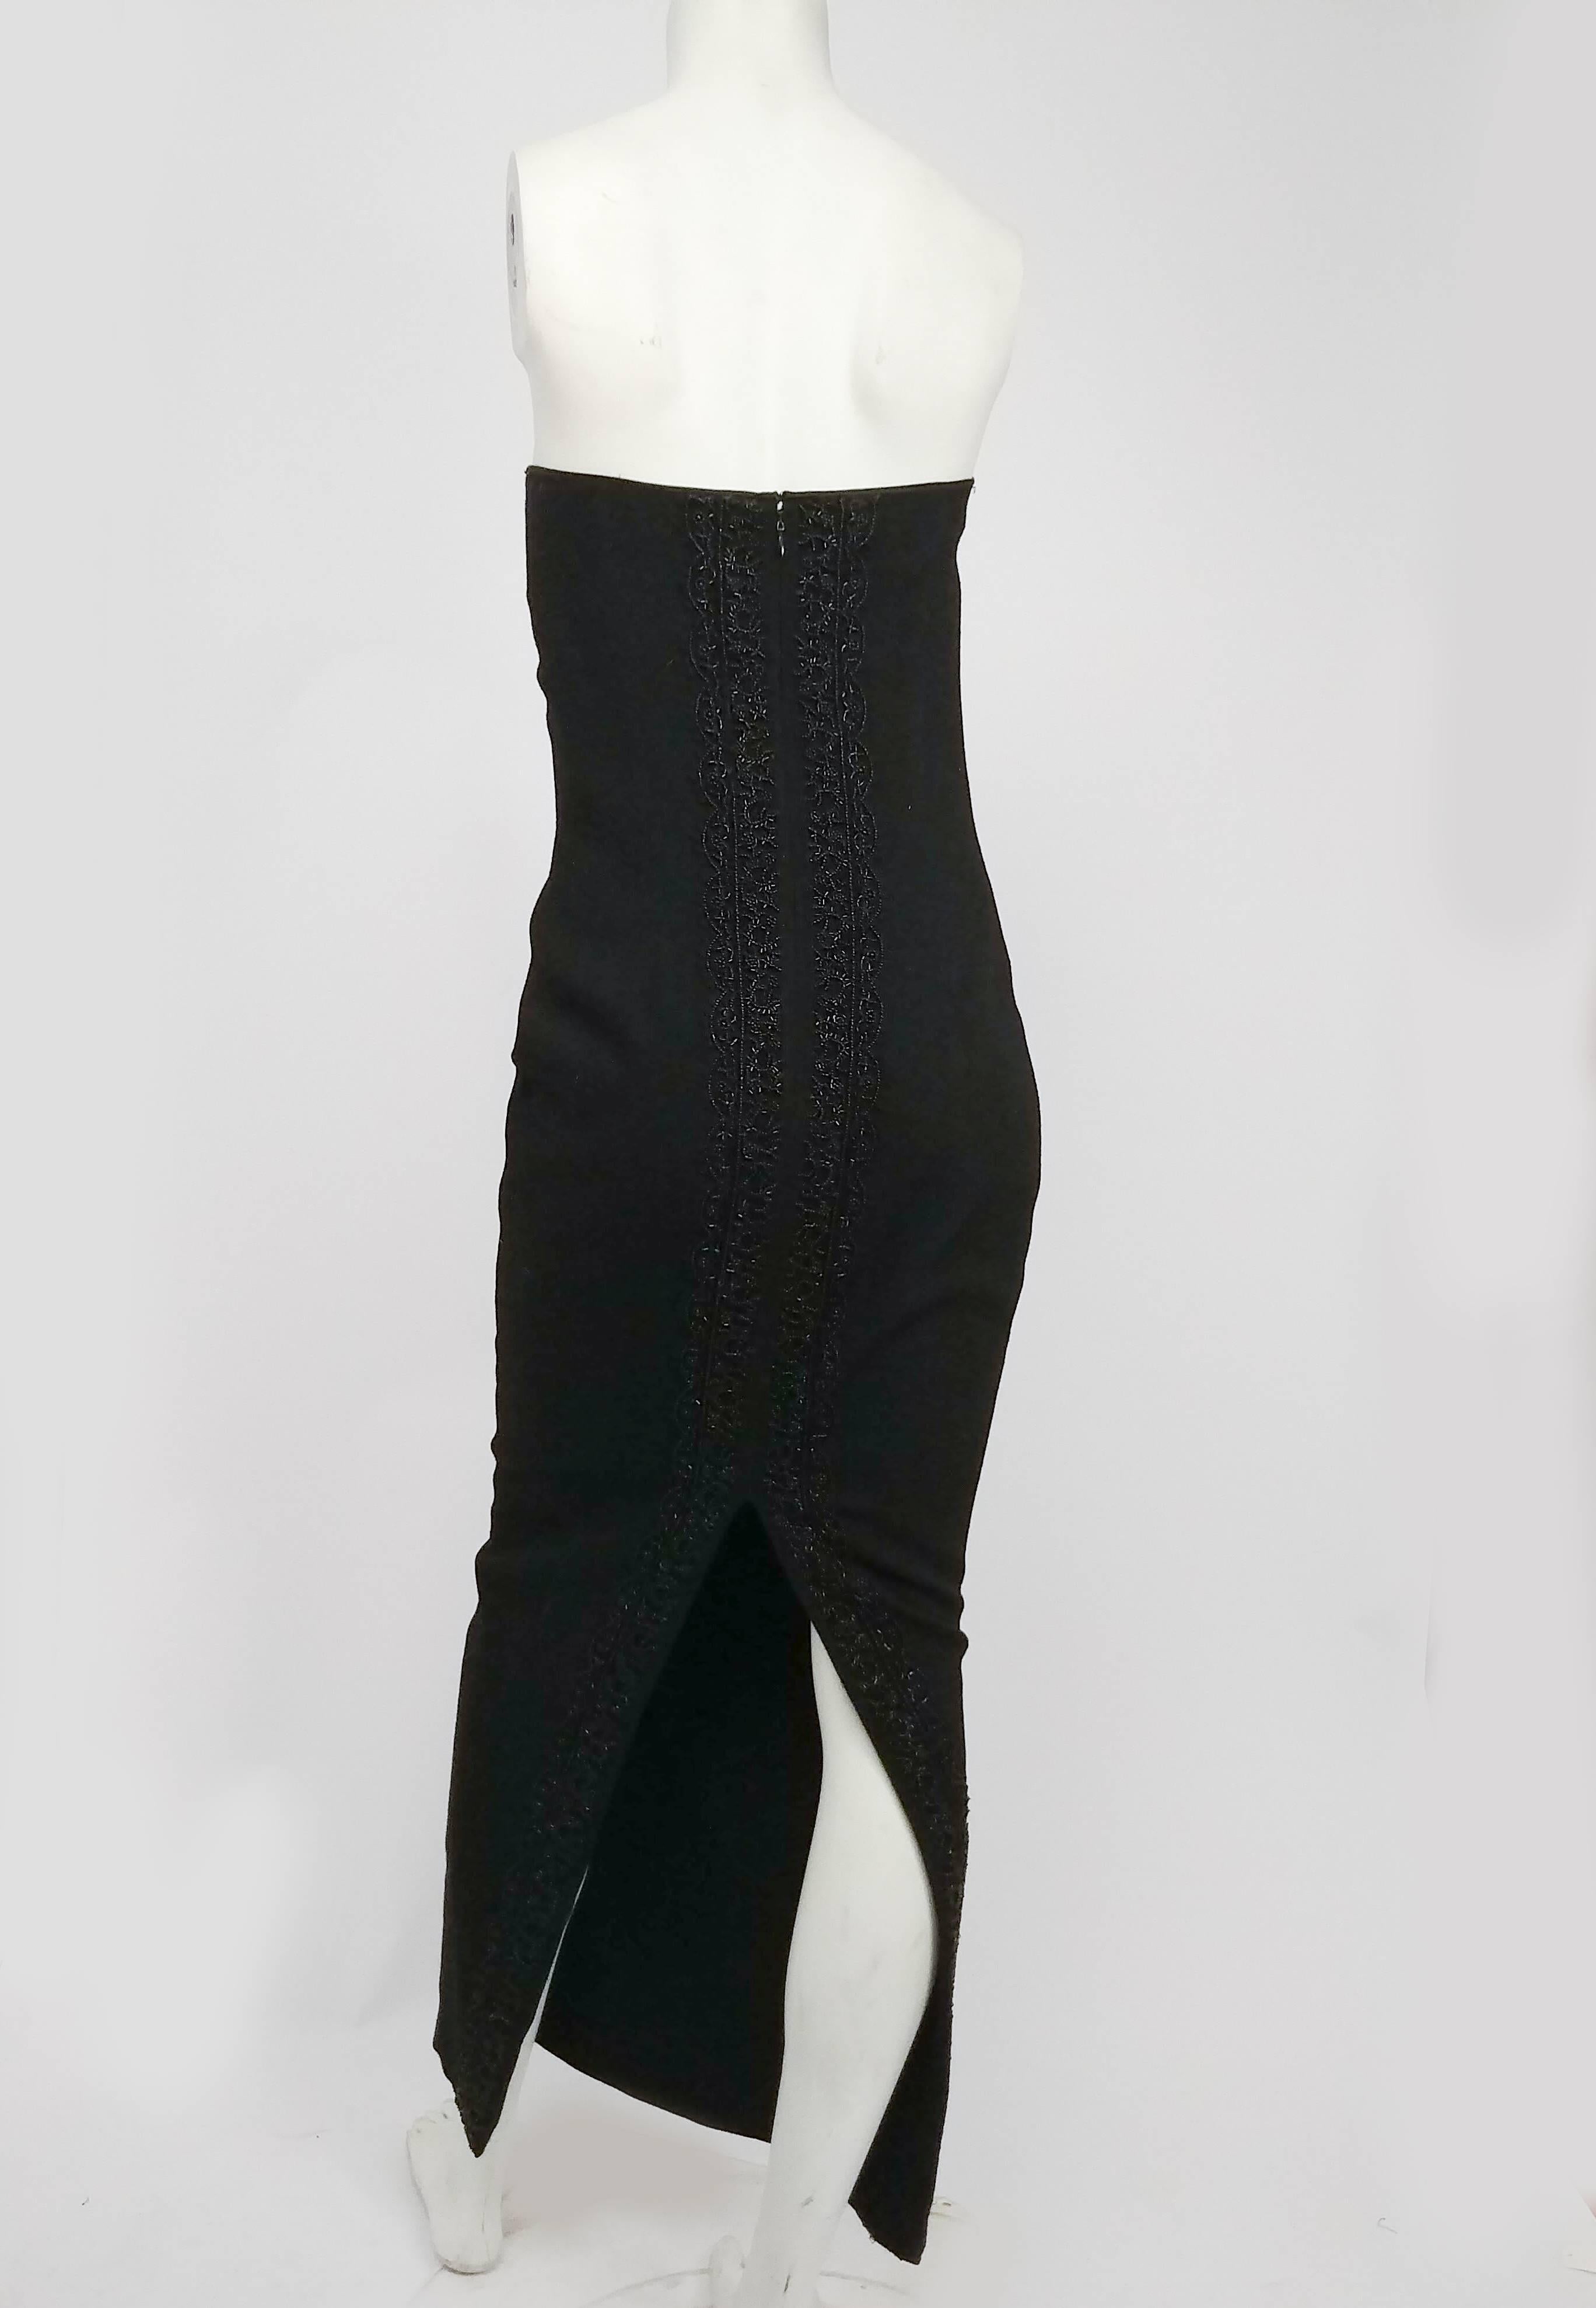 1990s Sylvia Heisel Strapless Knit Dress. Black thick knit strapless bodycon dress with slit up back, and beaded back detail up the center.